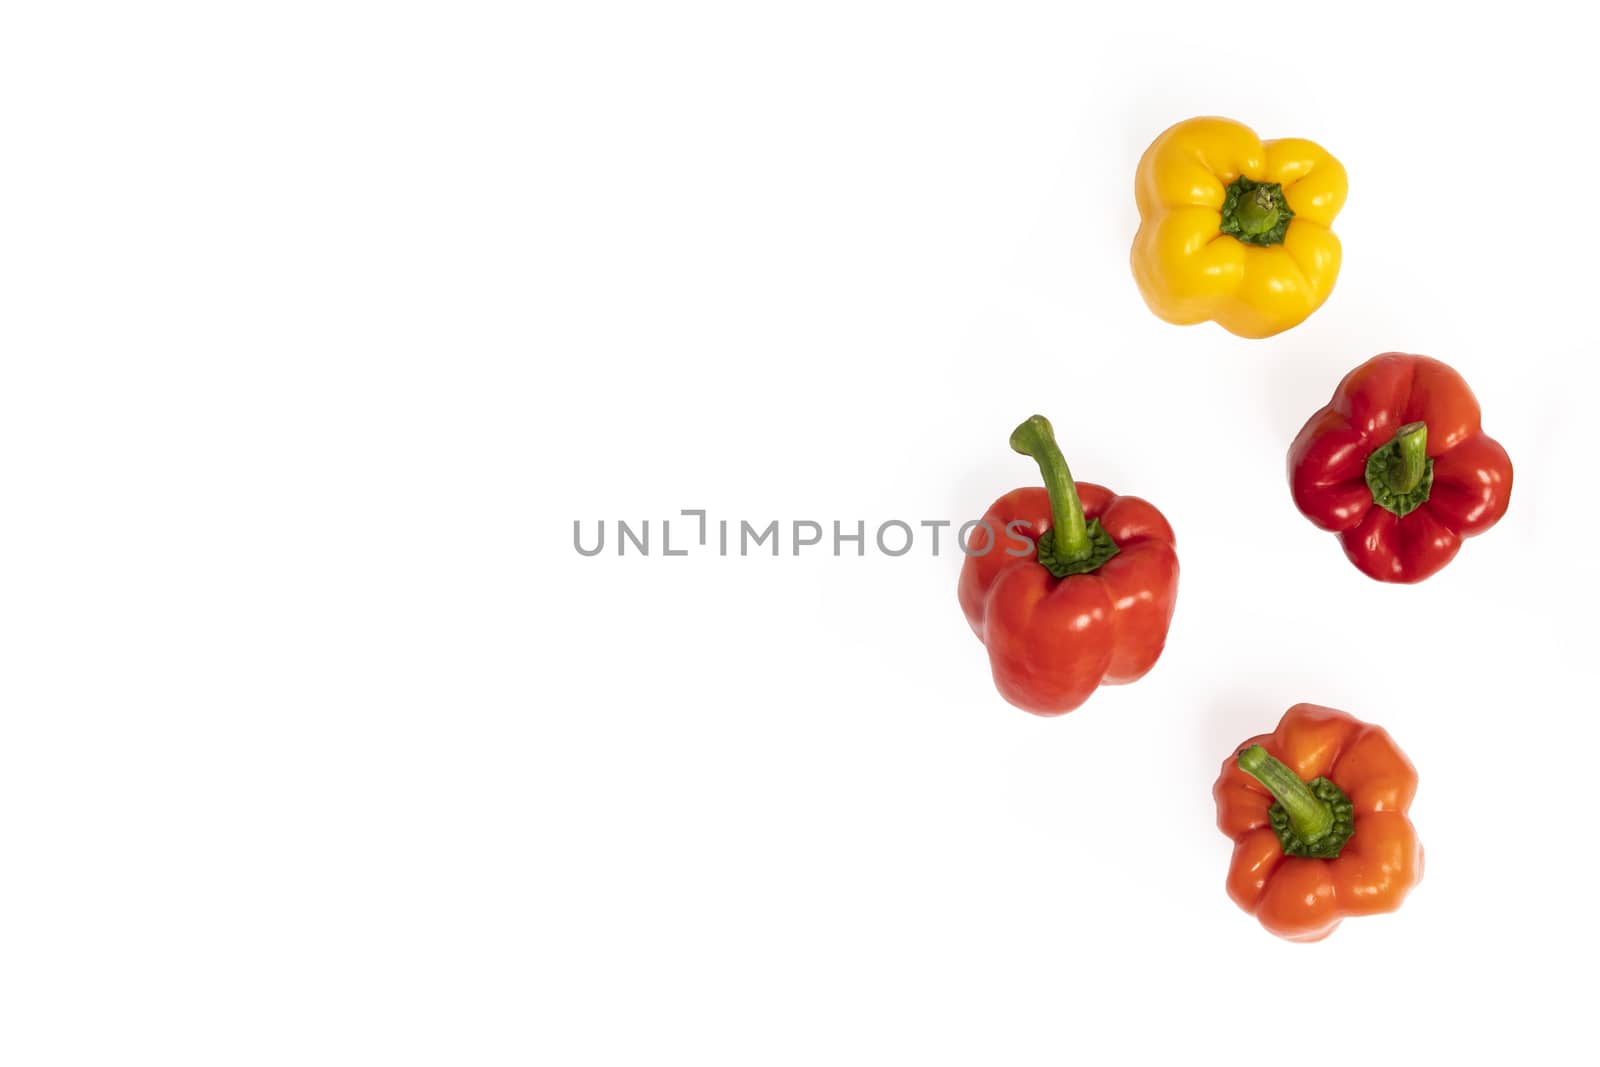 Colorful sweet bell peppers in red, orange and yellow. Isolated on white background